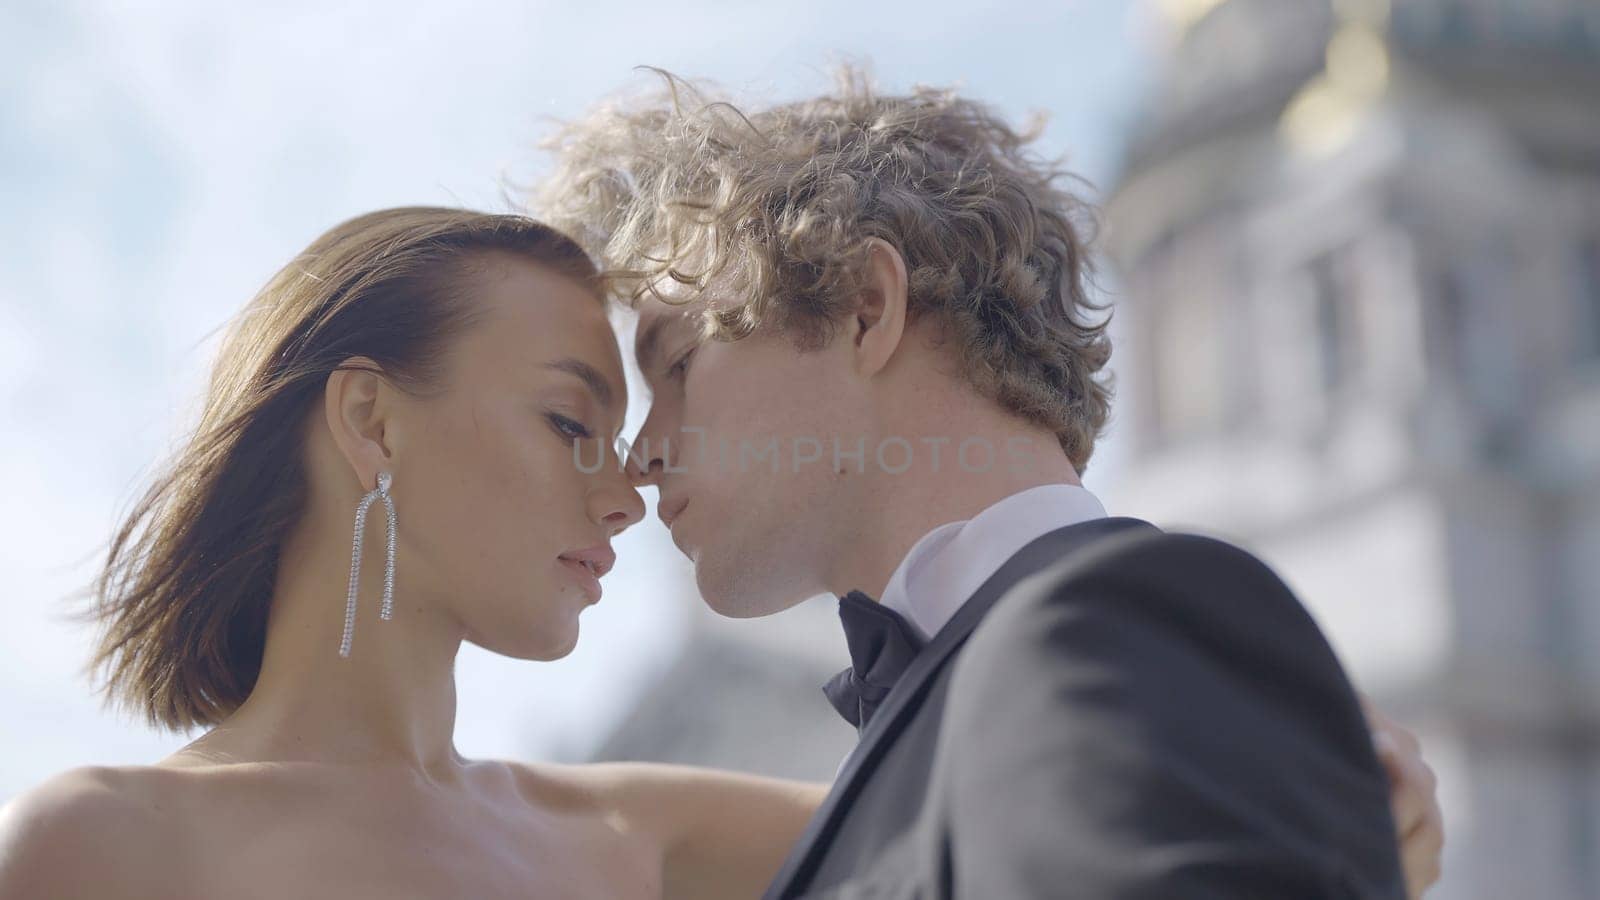 Elegant newlyweds are close to each other. Action. Passionate and stylish newlyweds on background of blue sky. Close-up of passionate tension between hugging couple.